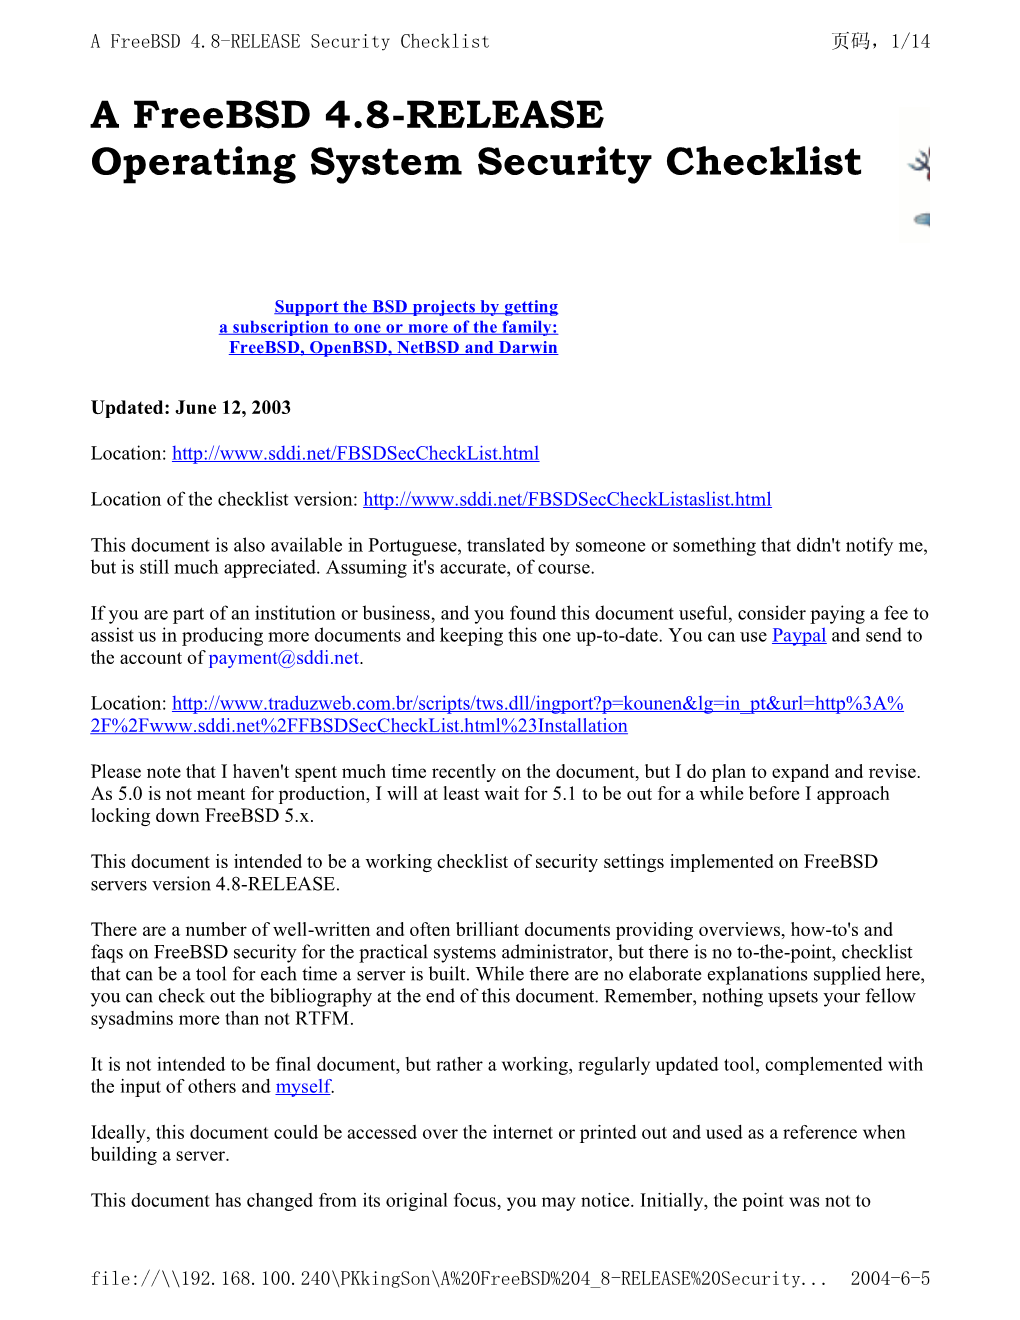 A Freebsd 4.8-RELEASE Operating System Security Checklist